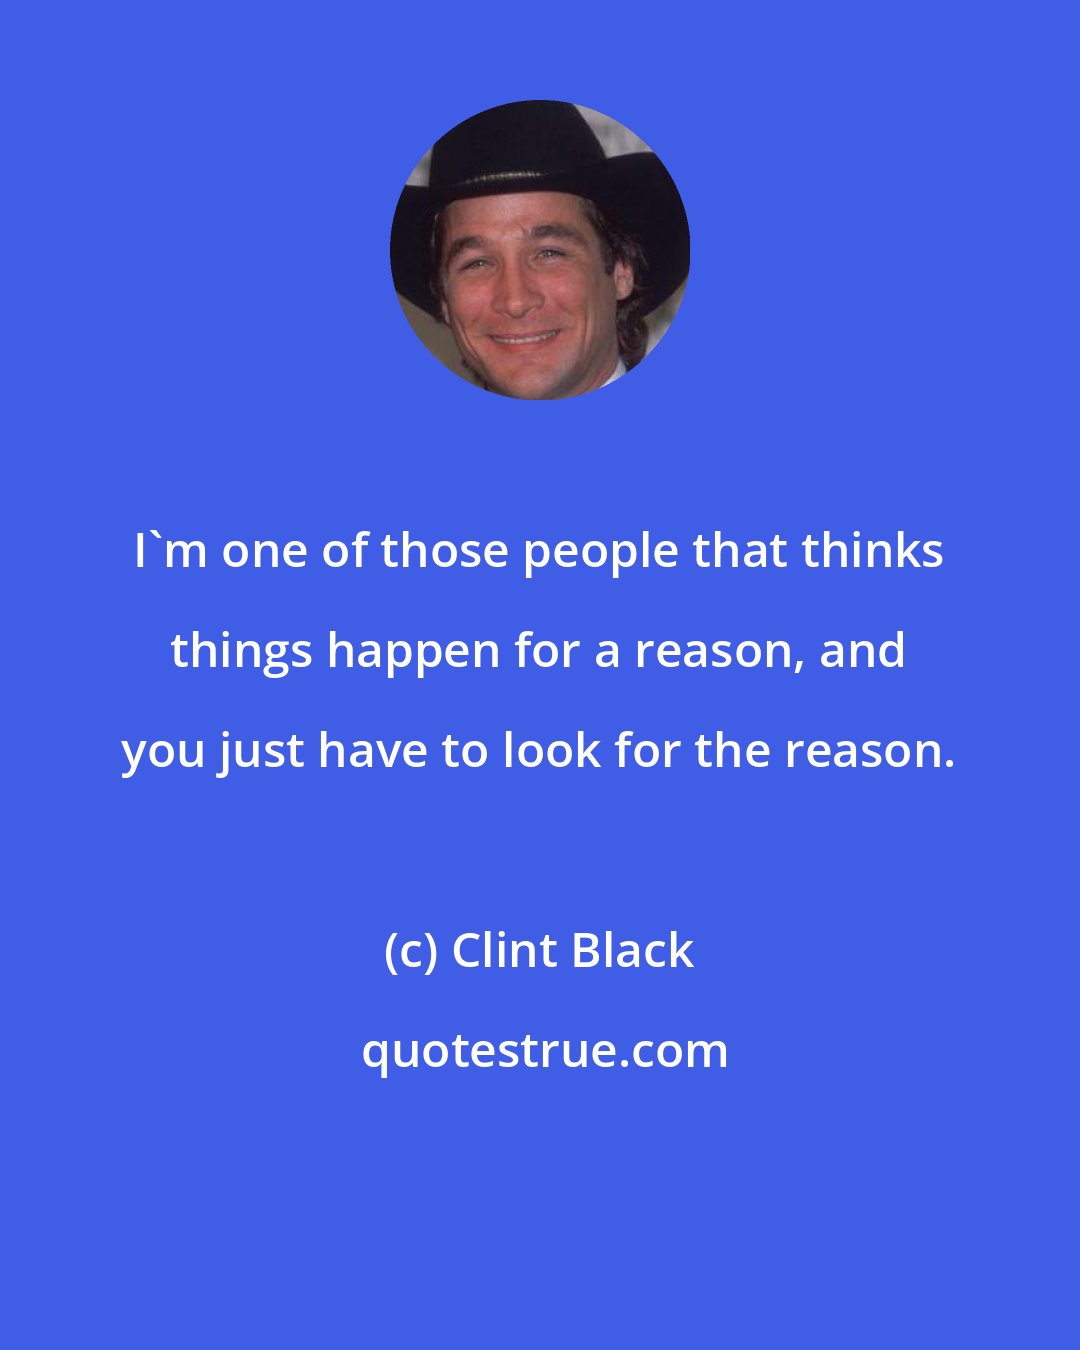 Clint Black: I'm one of those people that thinks things happen for a reason, and you just have to look for the reason.